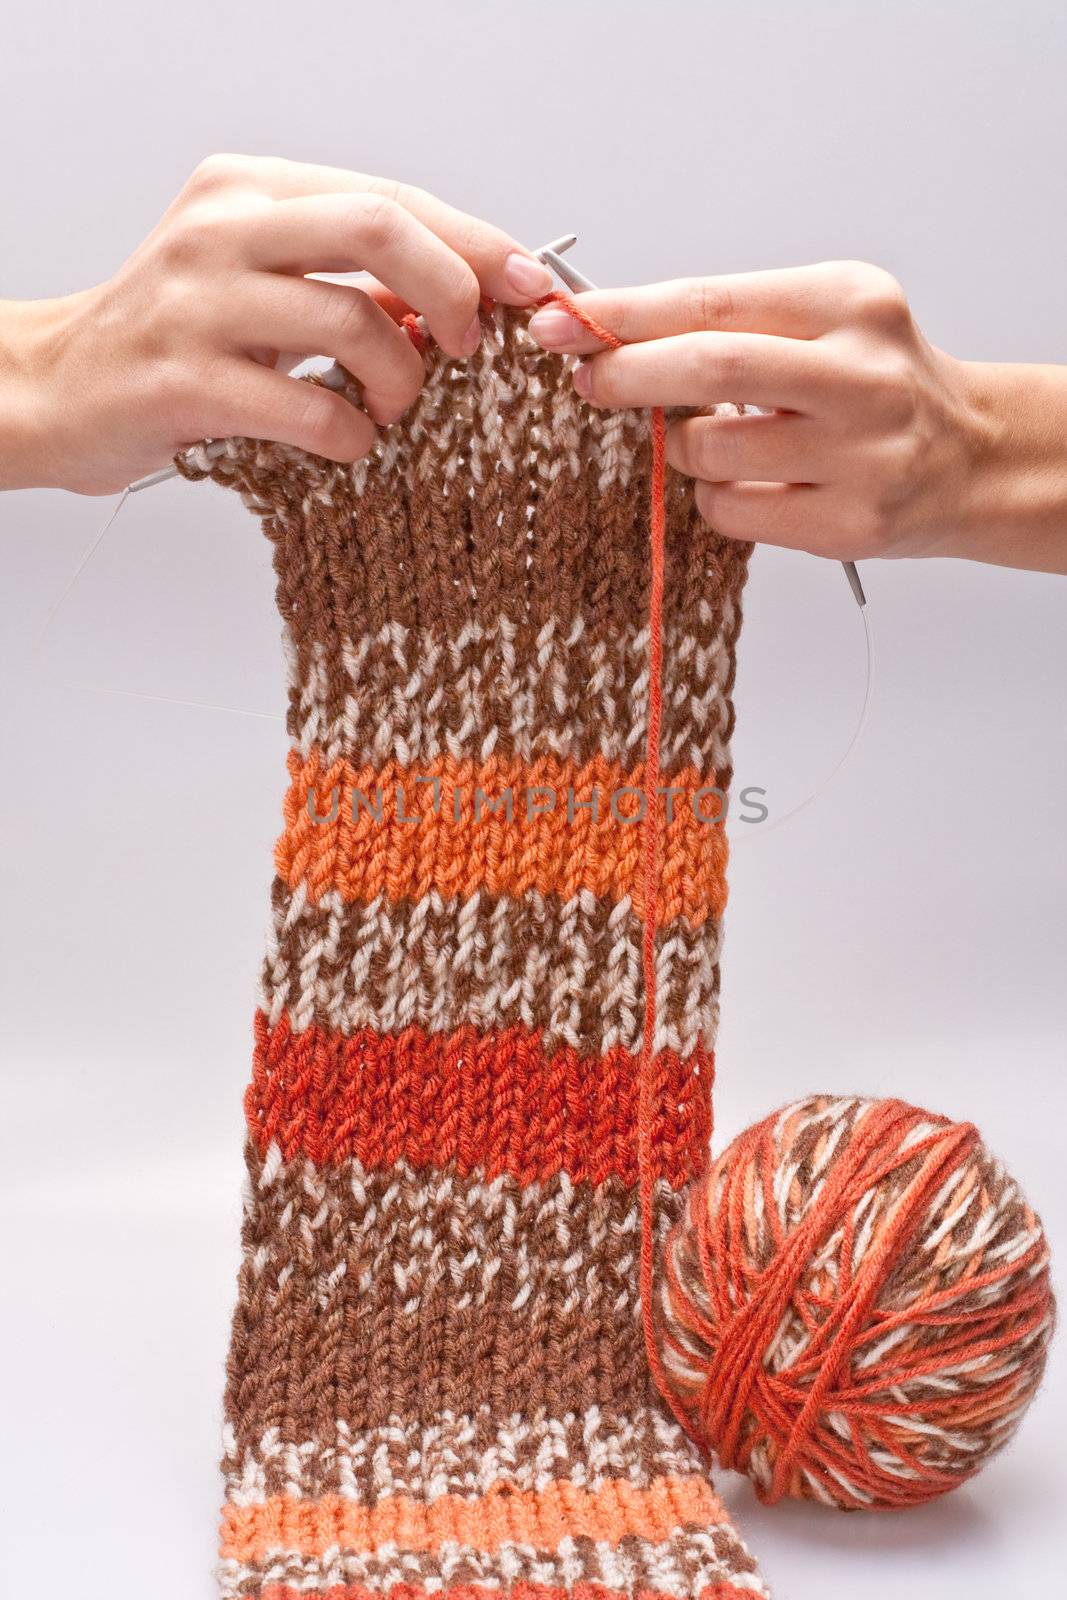 woman's hand knit knitting yarn by Lupen